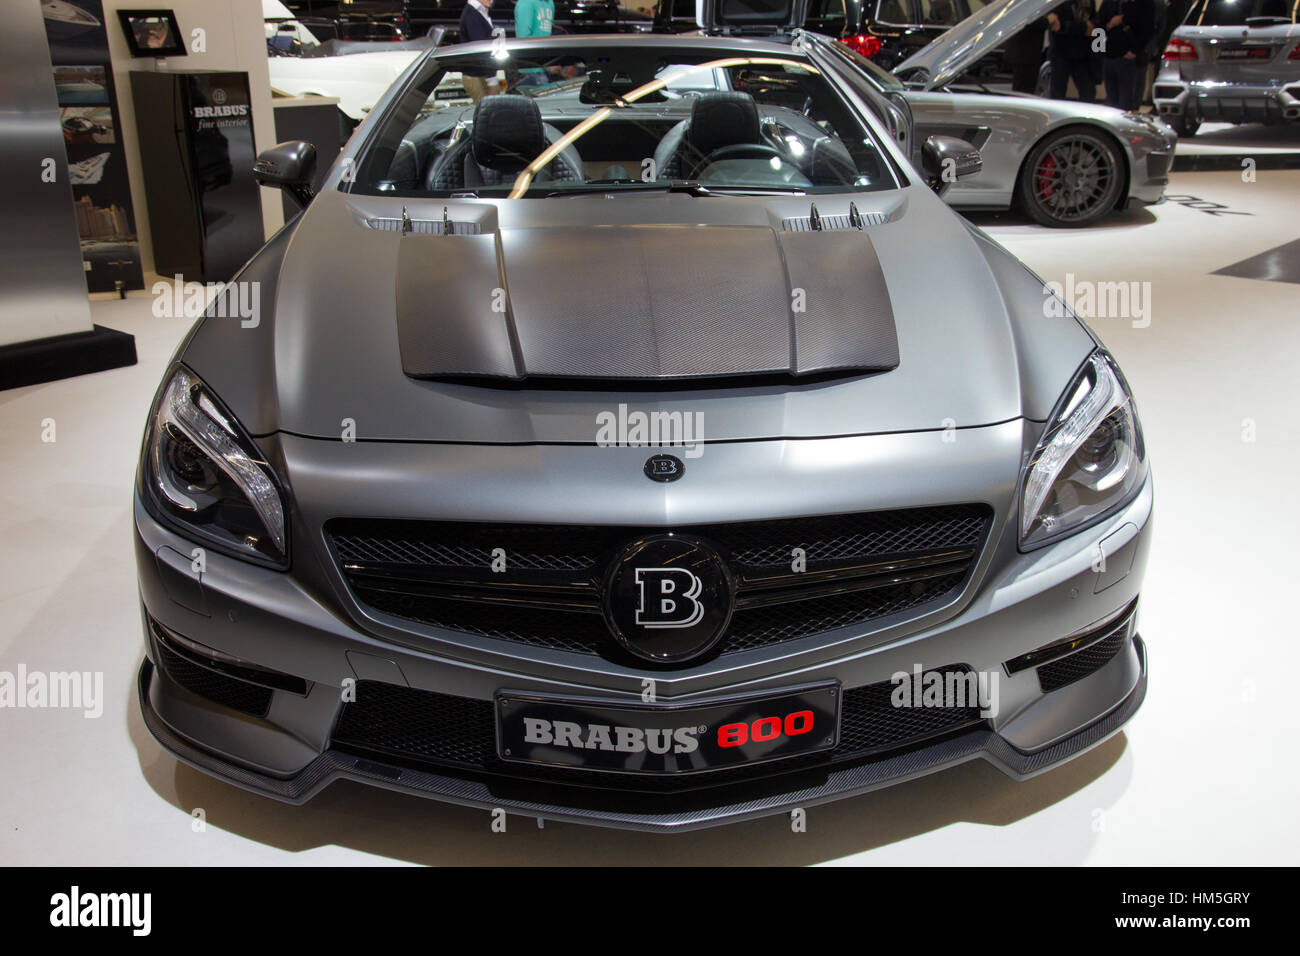 FRANKFURT, GERMANY - SEP 20: Brabus 800 Mercedes Benz SL 65 AMG at the IAA motor show on Sep 20, 2013 in Frankfurt. More than 1.000 exhibitors from 35 Stock Photo